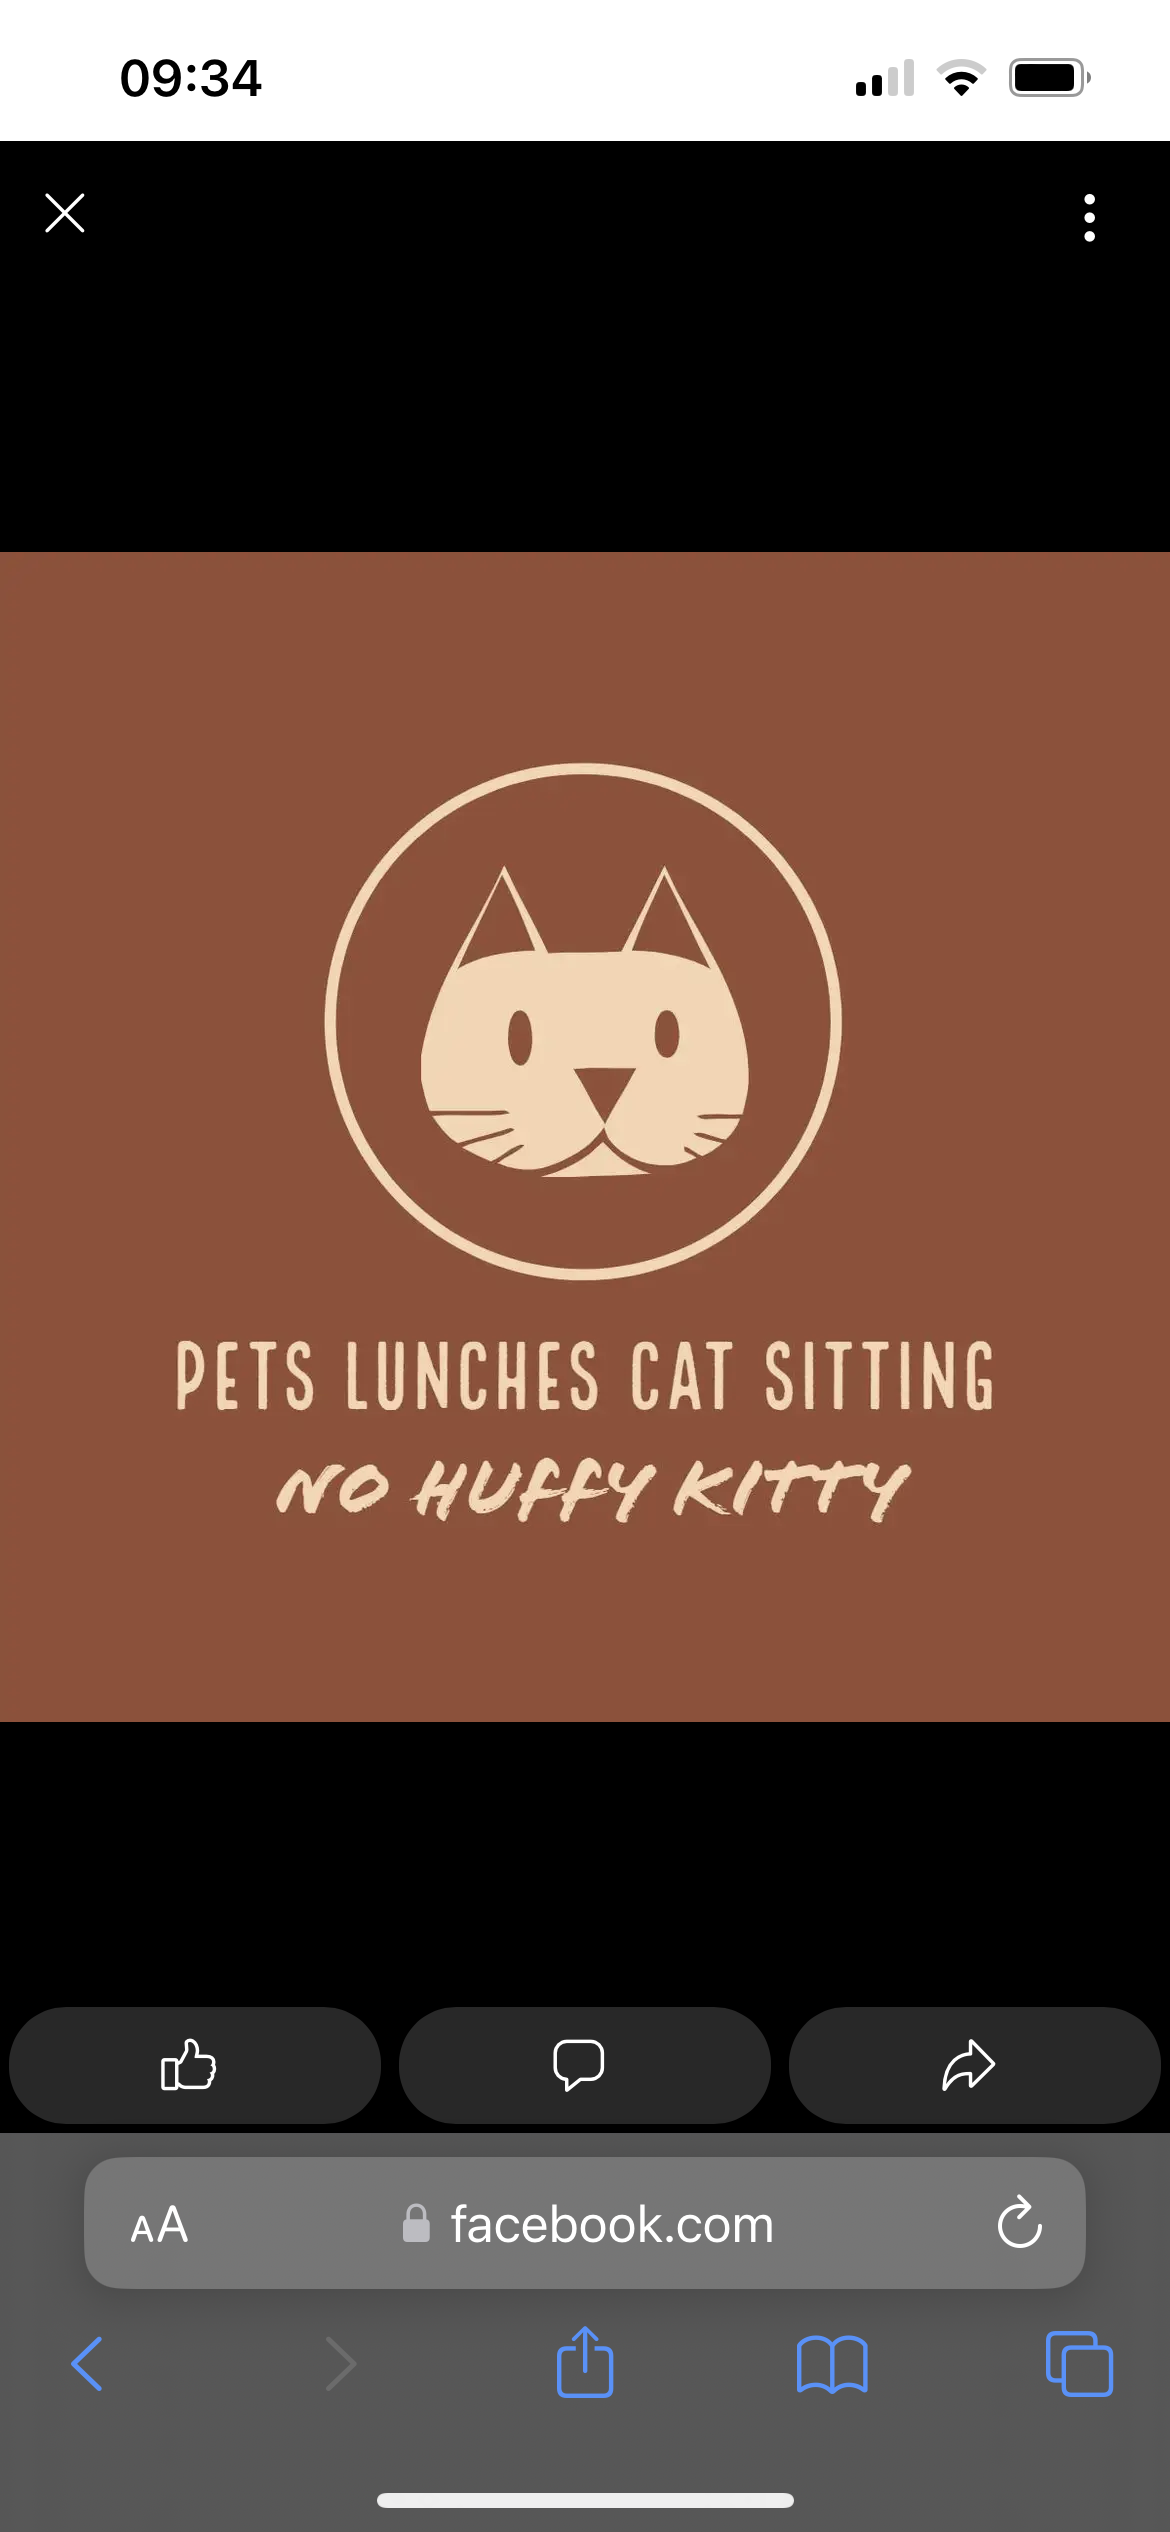 Logo of Pets lunches West Lothian Cat sitter